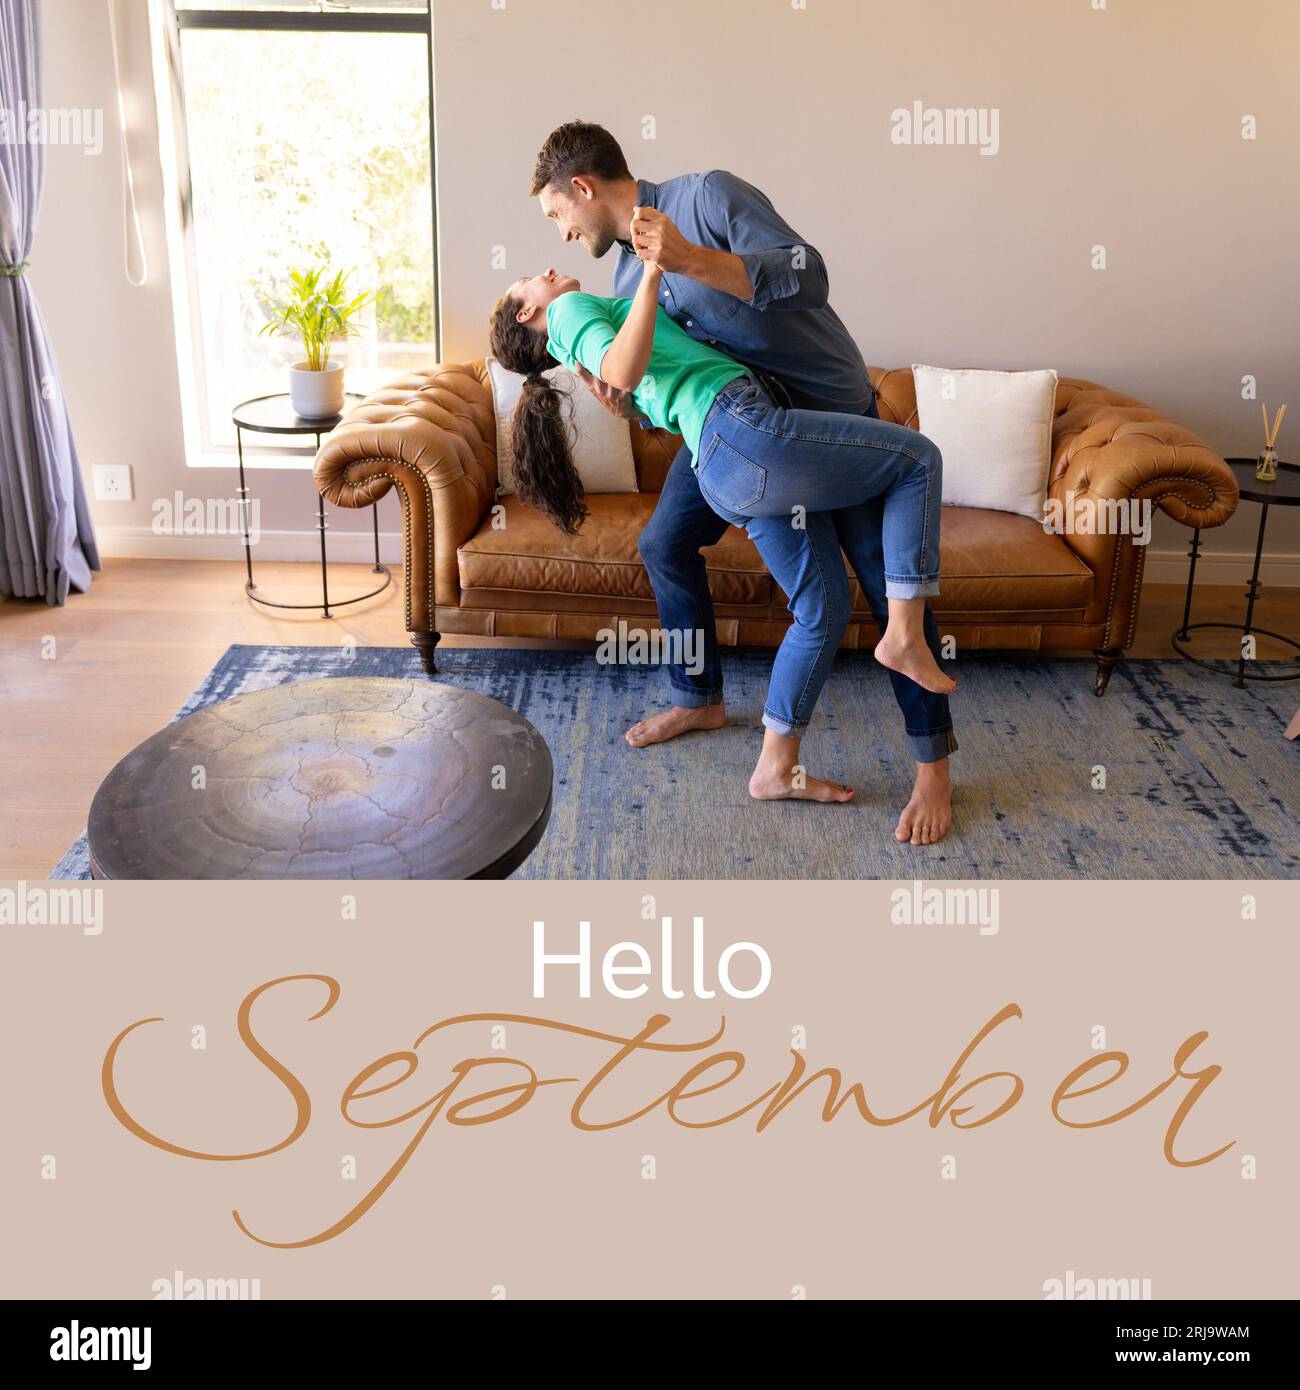 Composite of hello september text over caucasian couple dancing in living room Stock Photo